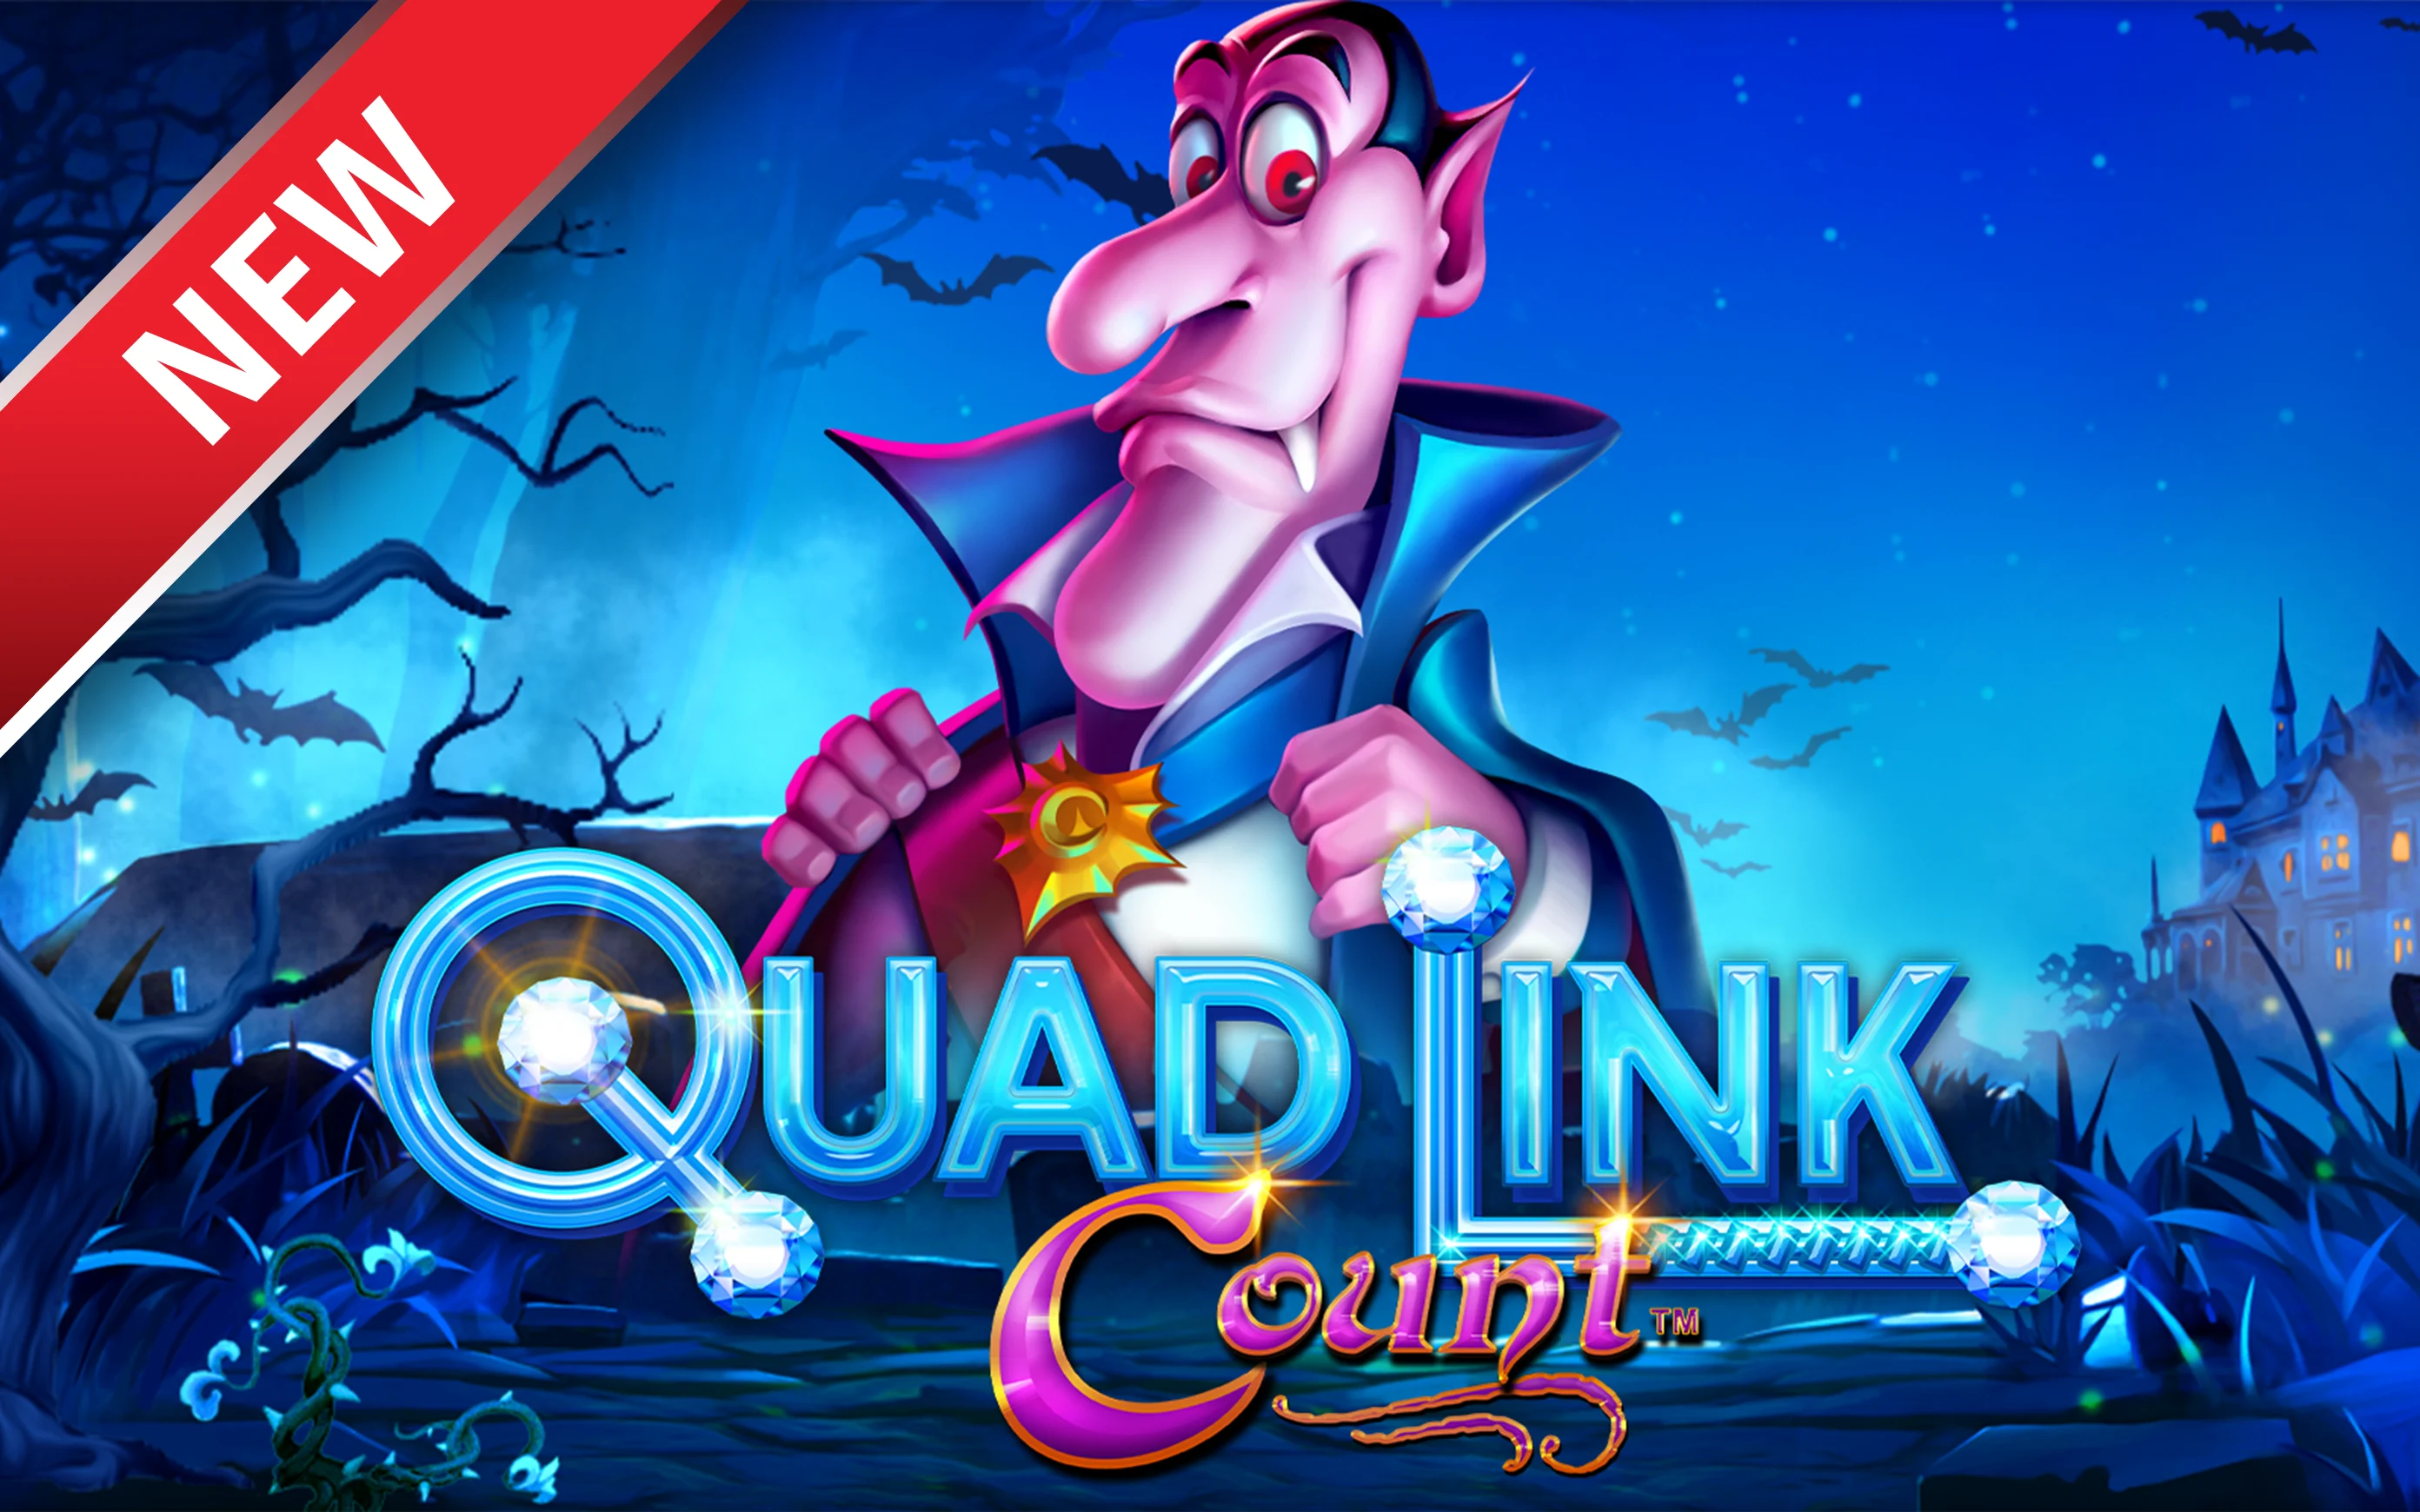 Play Quad Link: Count™ on Starcasino.be online casino